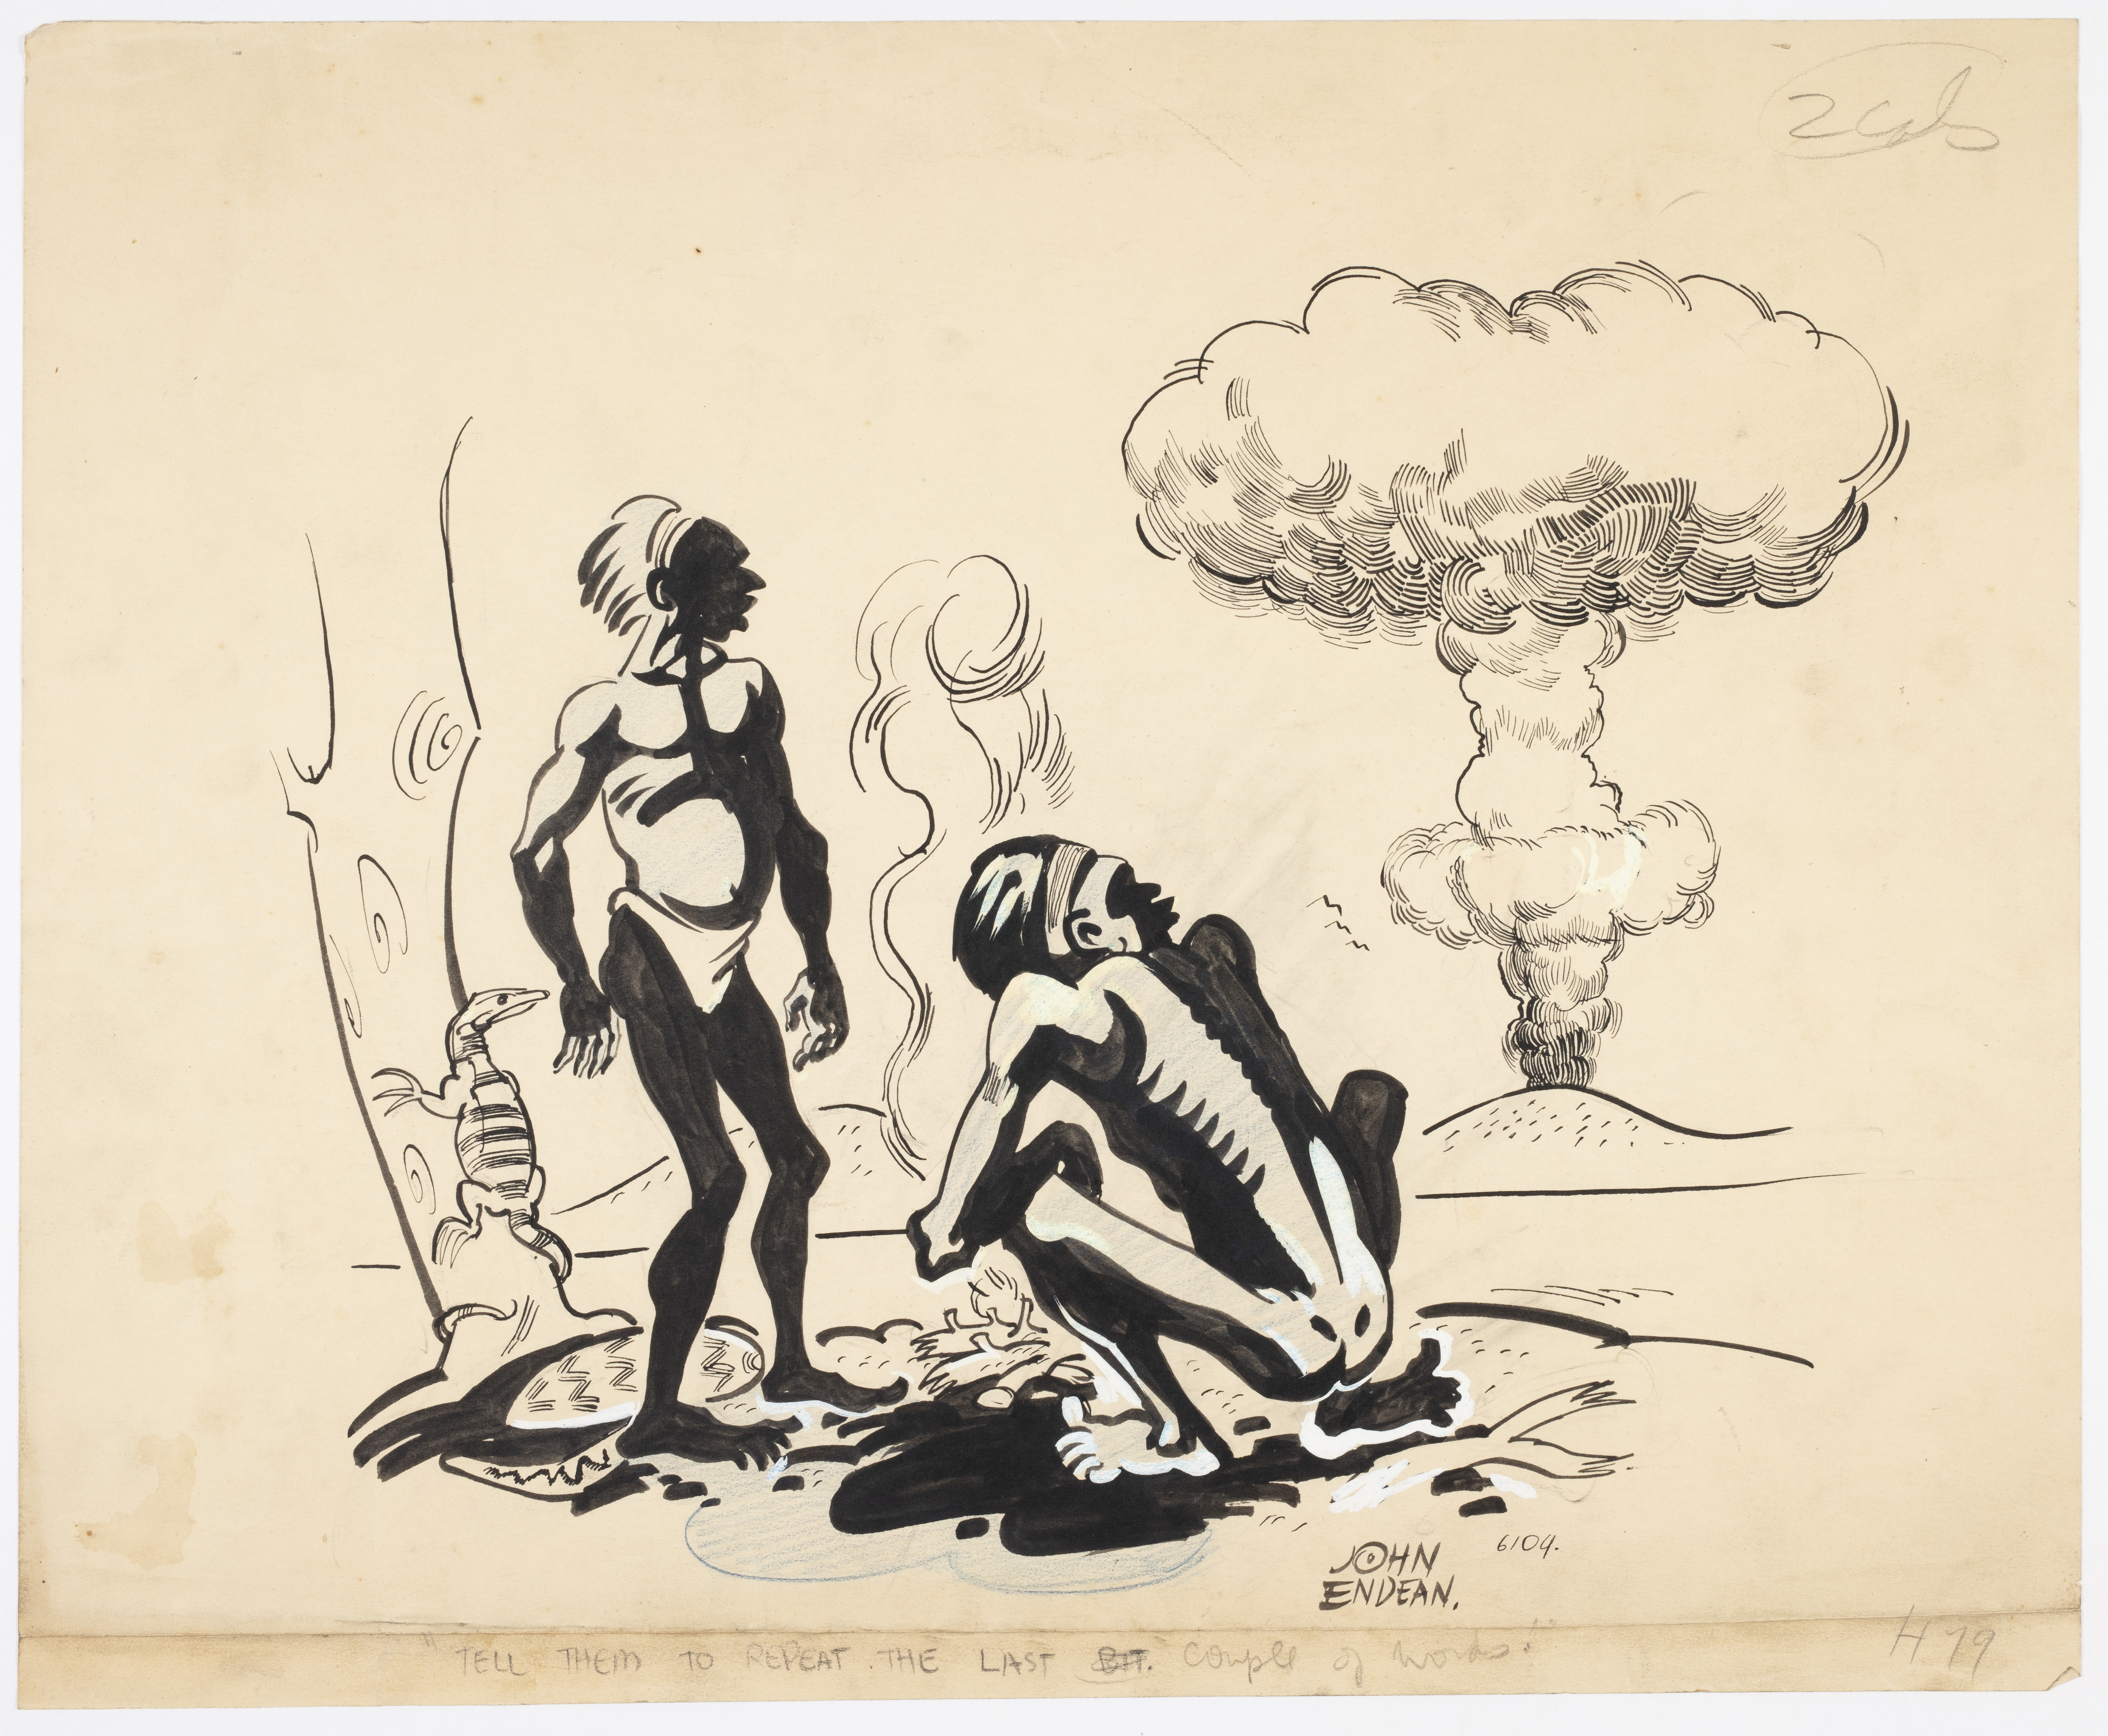 A cartoon depicting two people, one standing and one crouching, looking at a mushroom cloud in the distance.